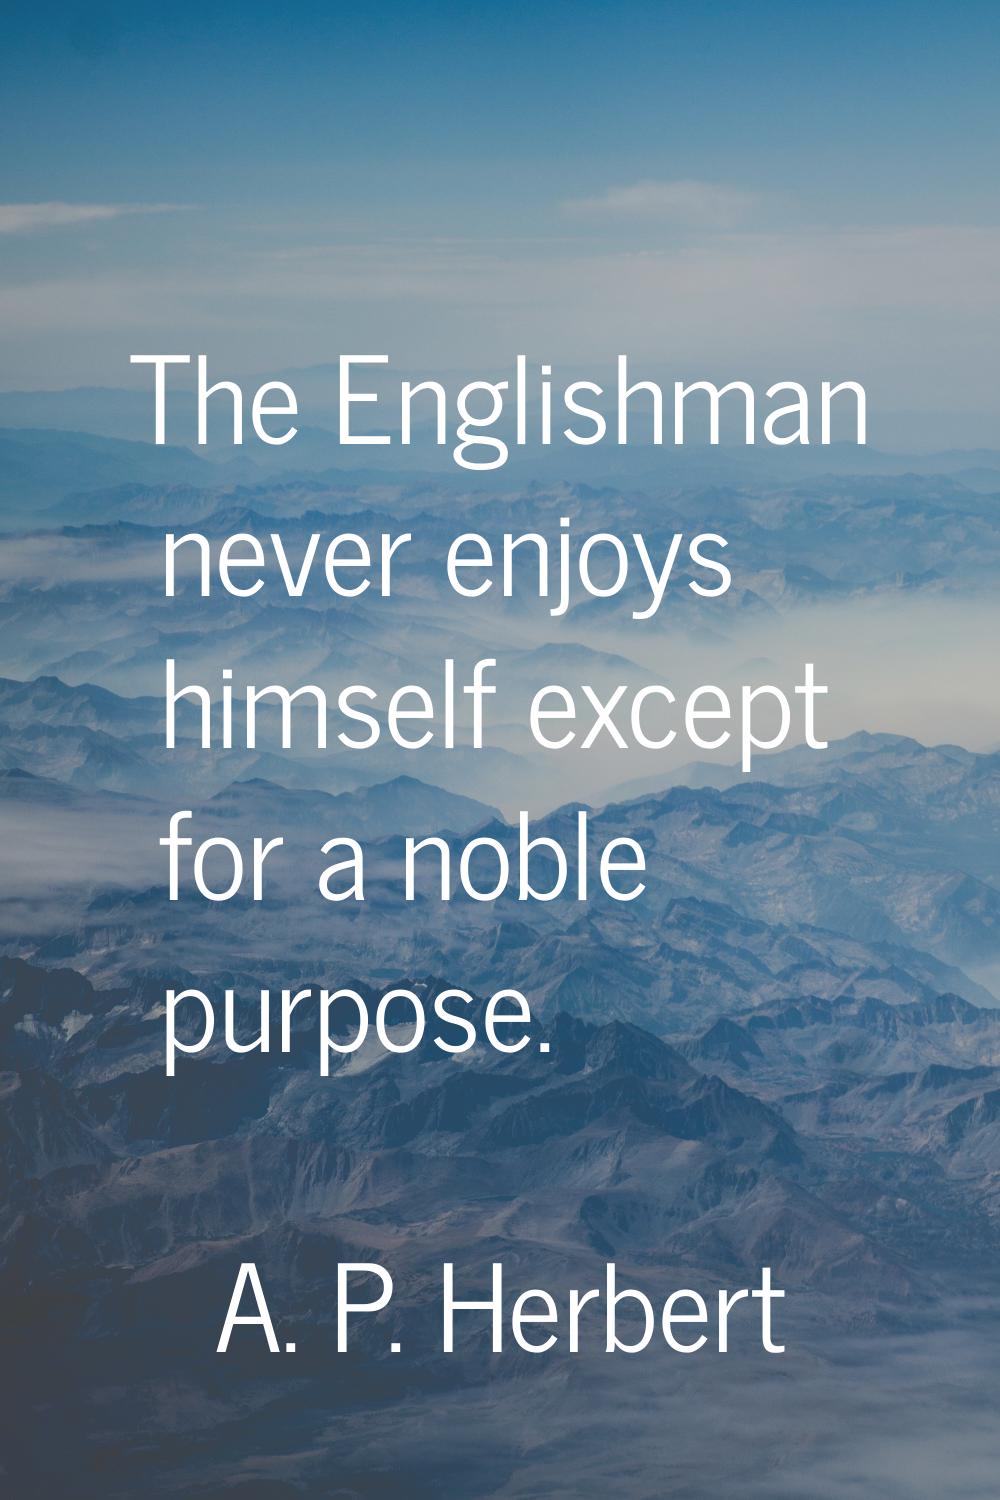 The Englishman never enjoys himself except for a noble purpose.